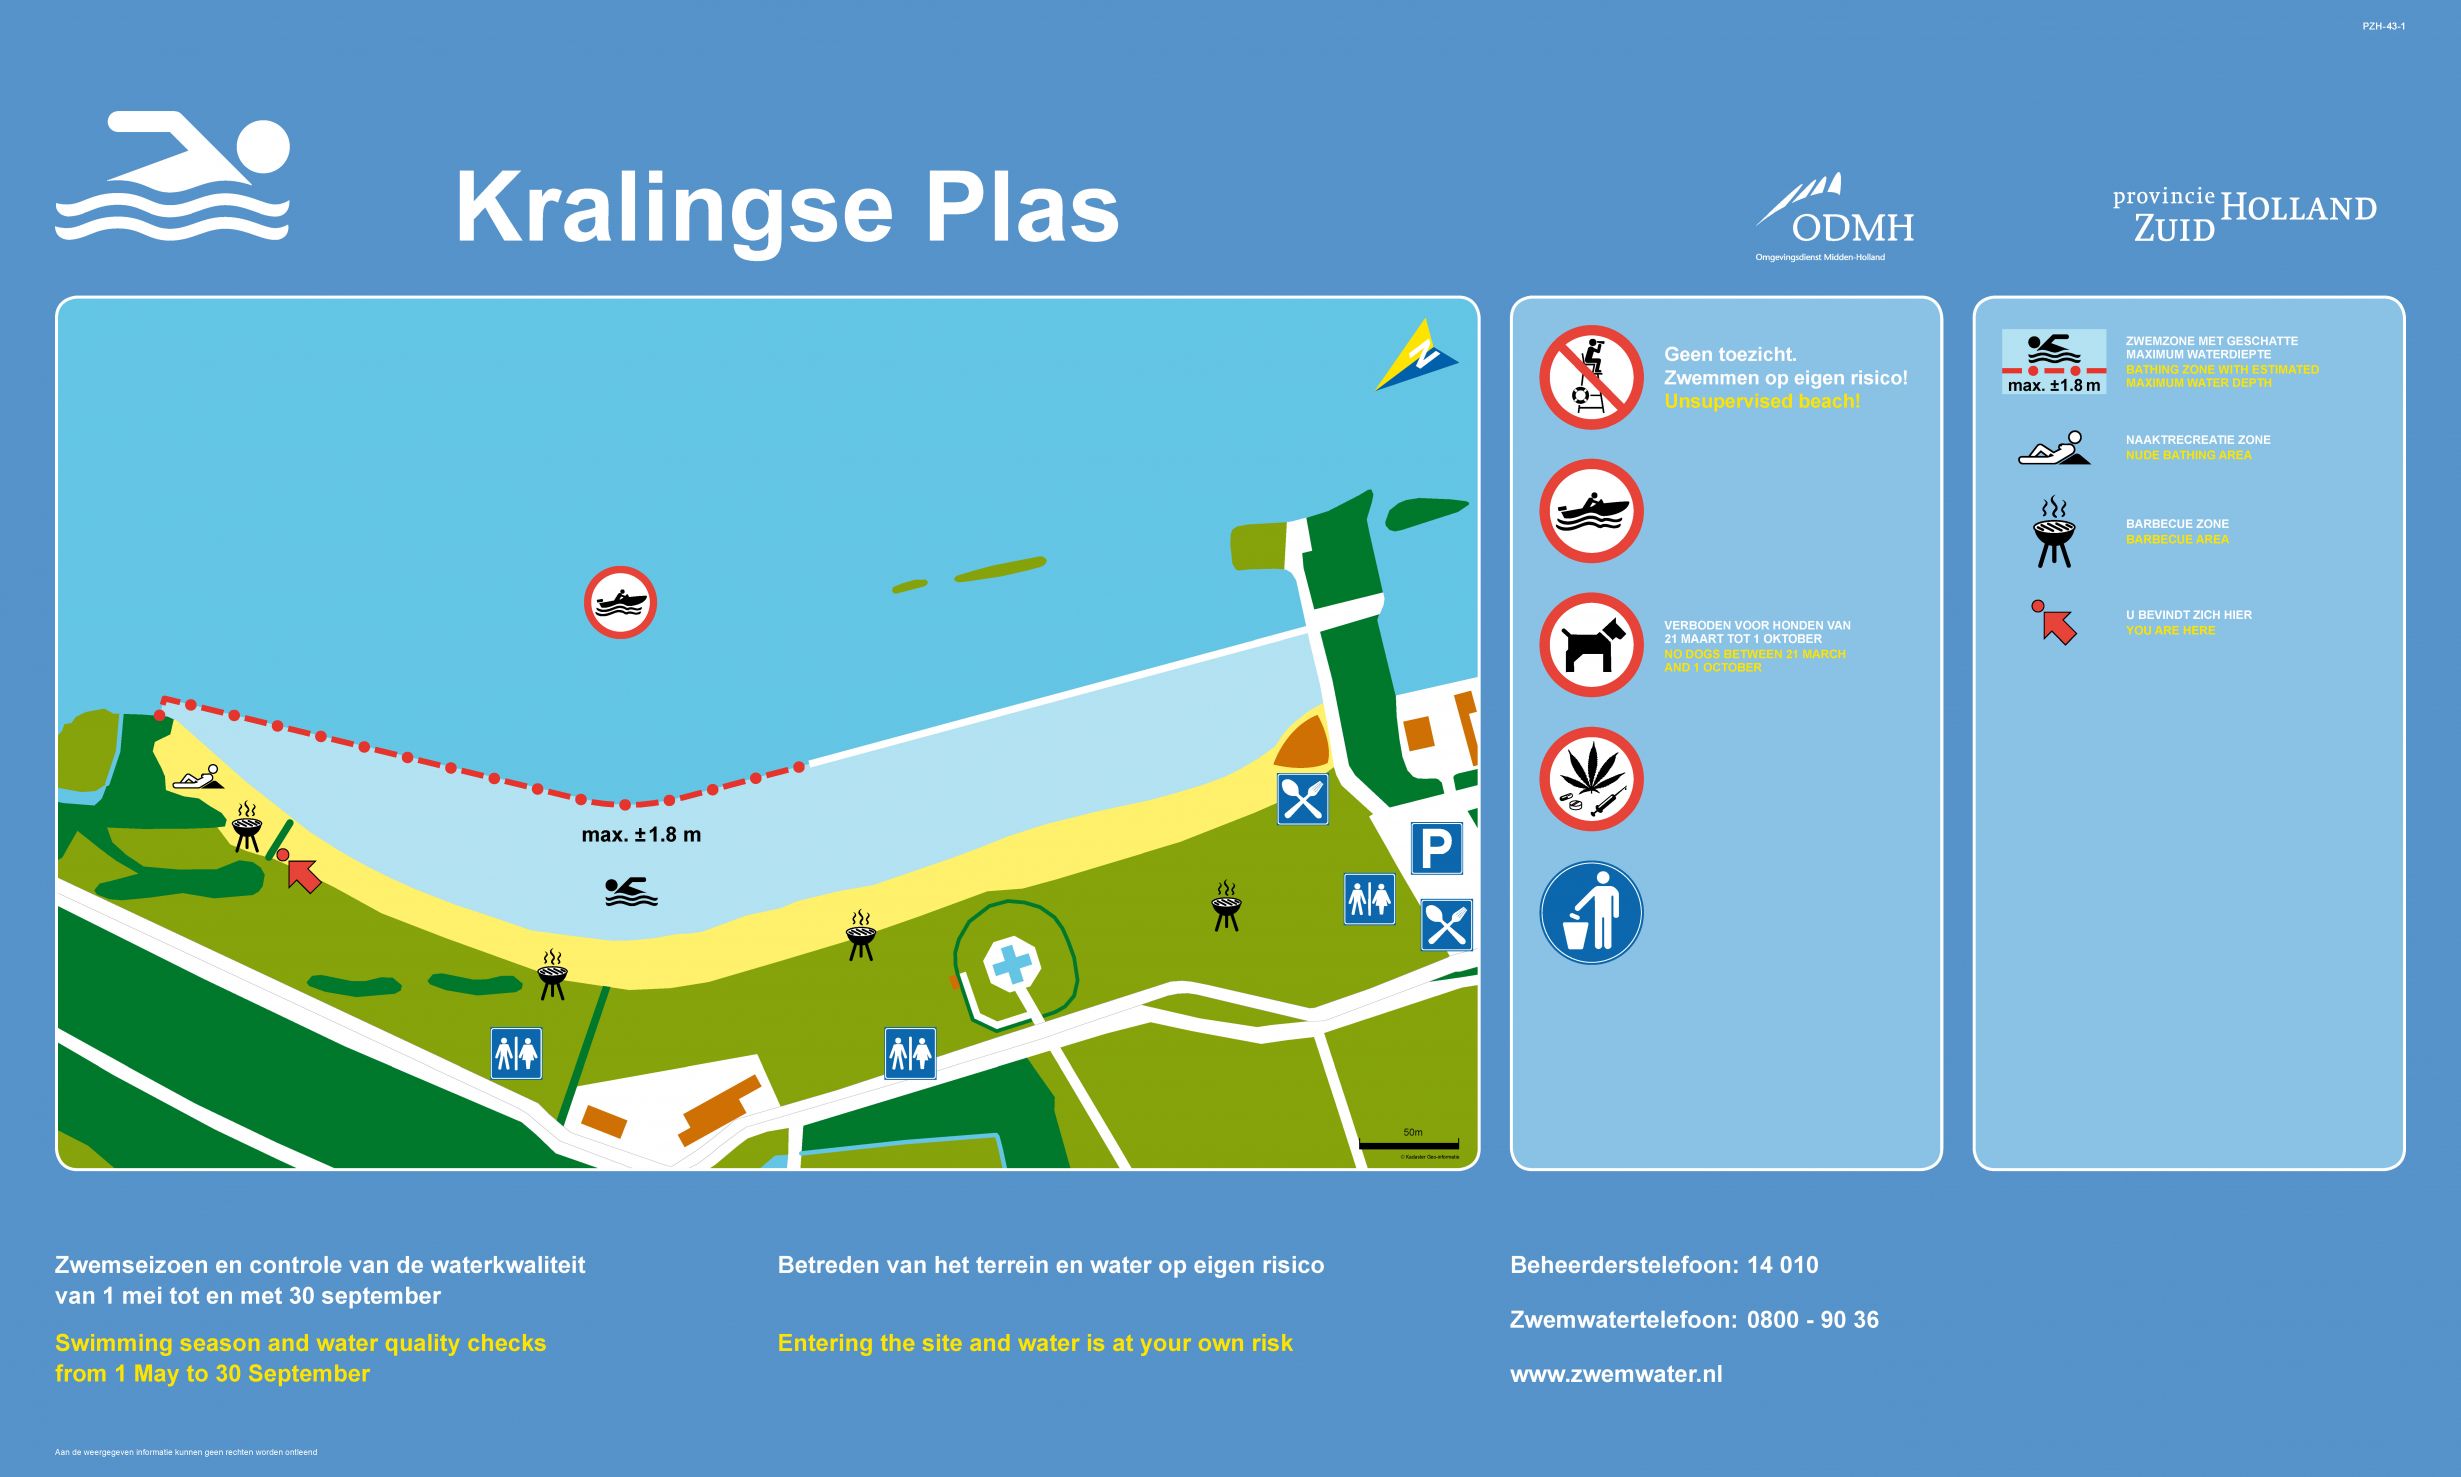 The information board at the swimming location Kralingse Plas